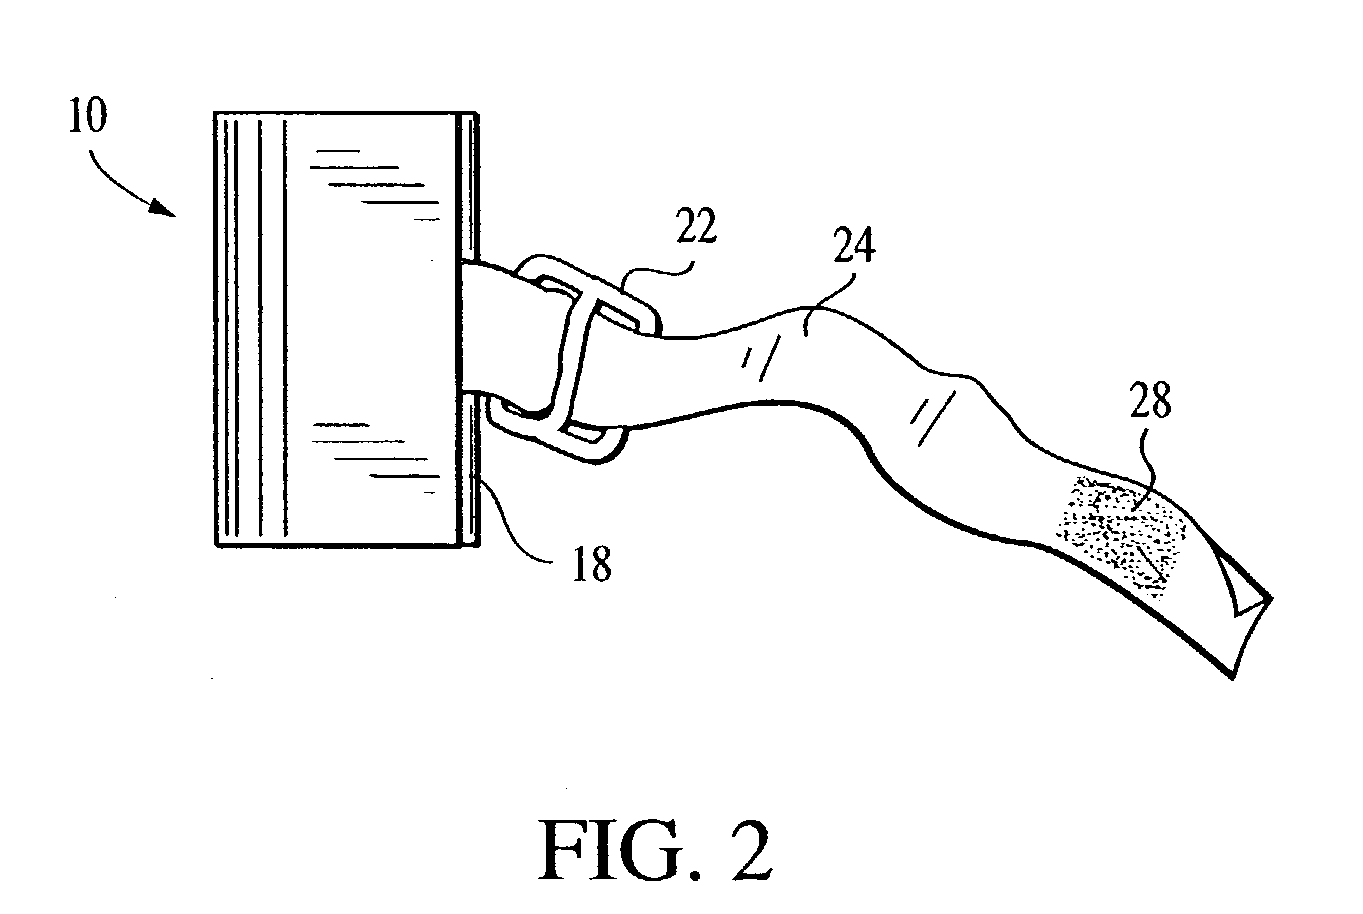 Adjustable apparatus and method for treating carpal tunnel syndrome